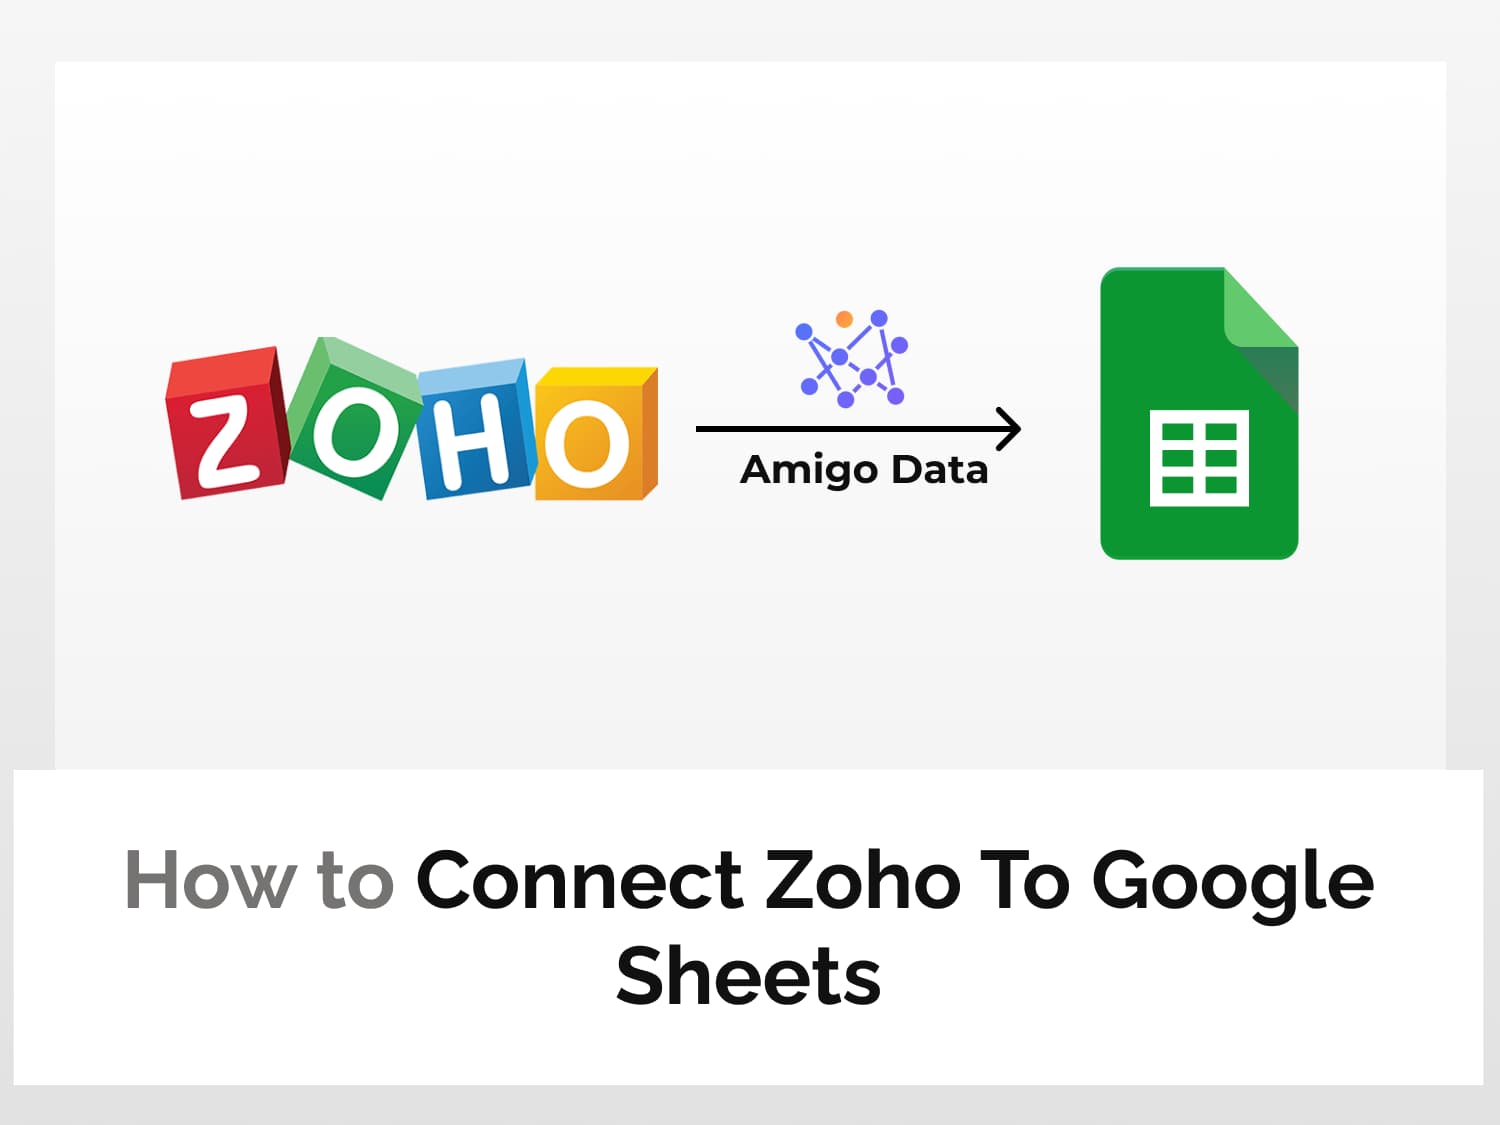 How to connect Zoho to Google Sheets